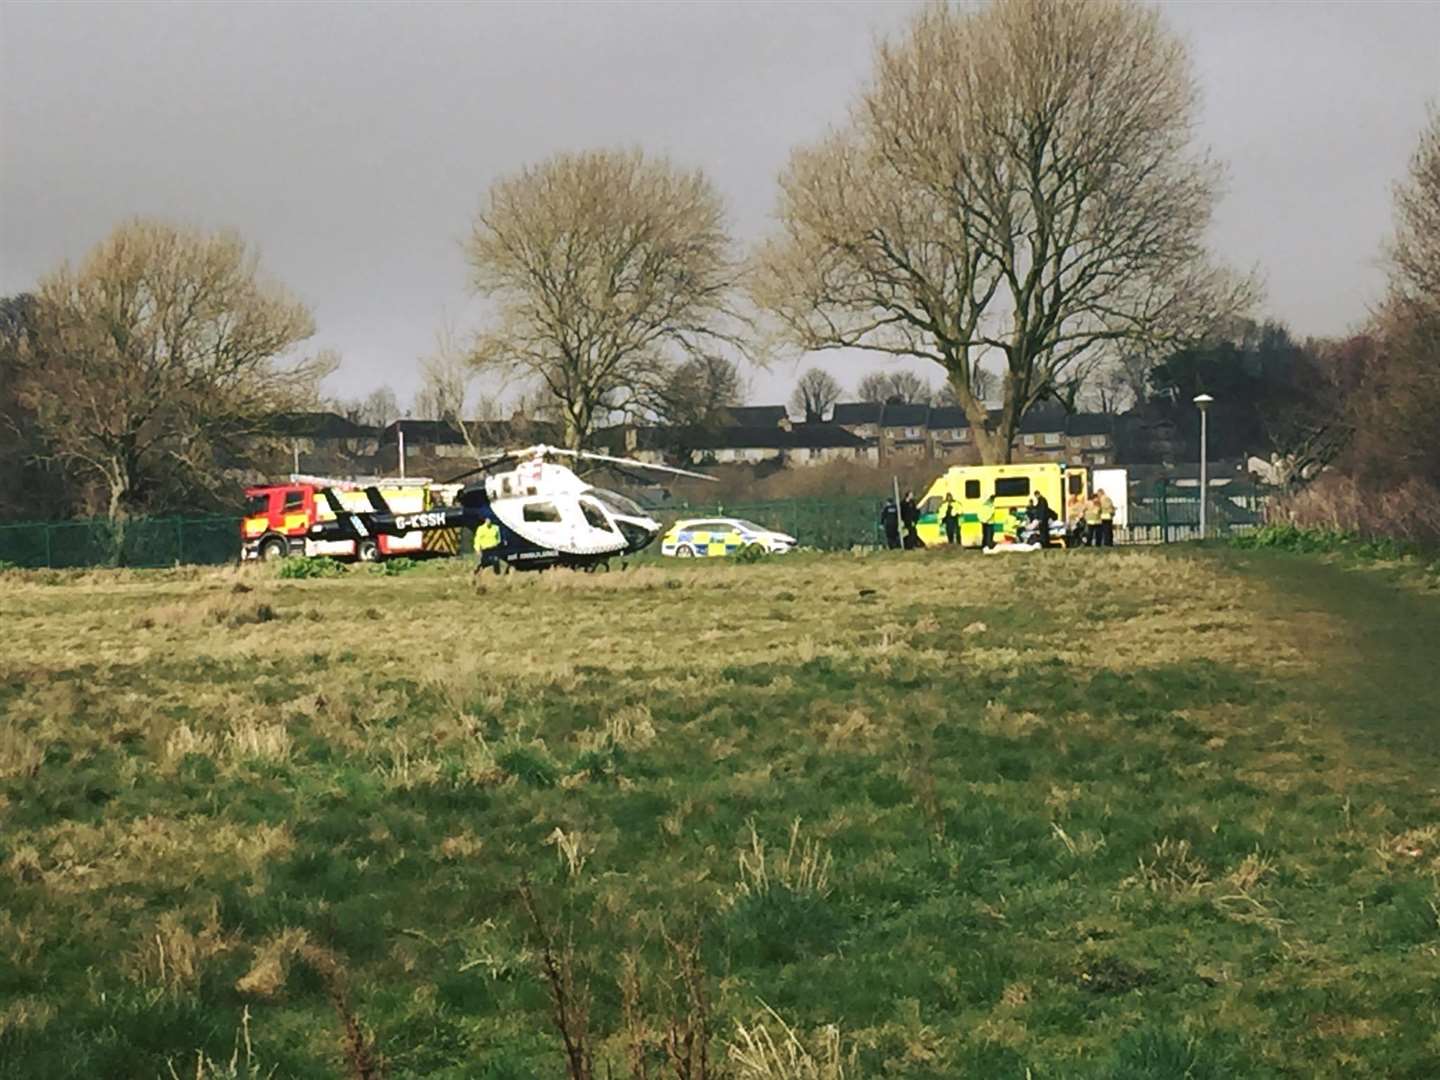 Emergency services vehicles and an air ambulance following the accident. Pictur courtesy of Laura Lou Morgan. (1275634)